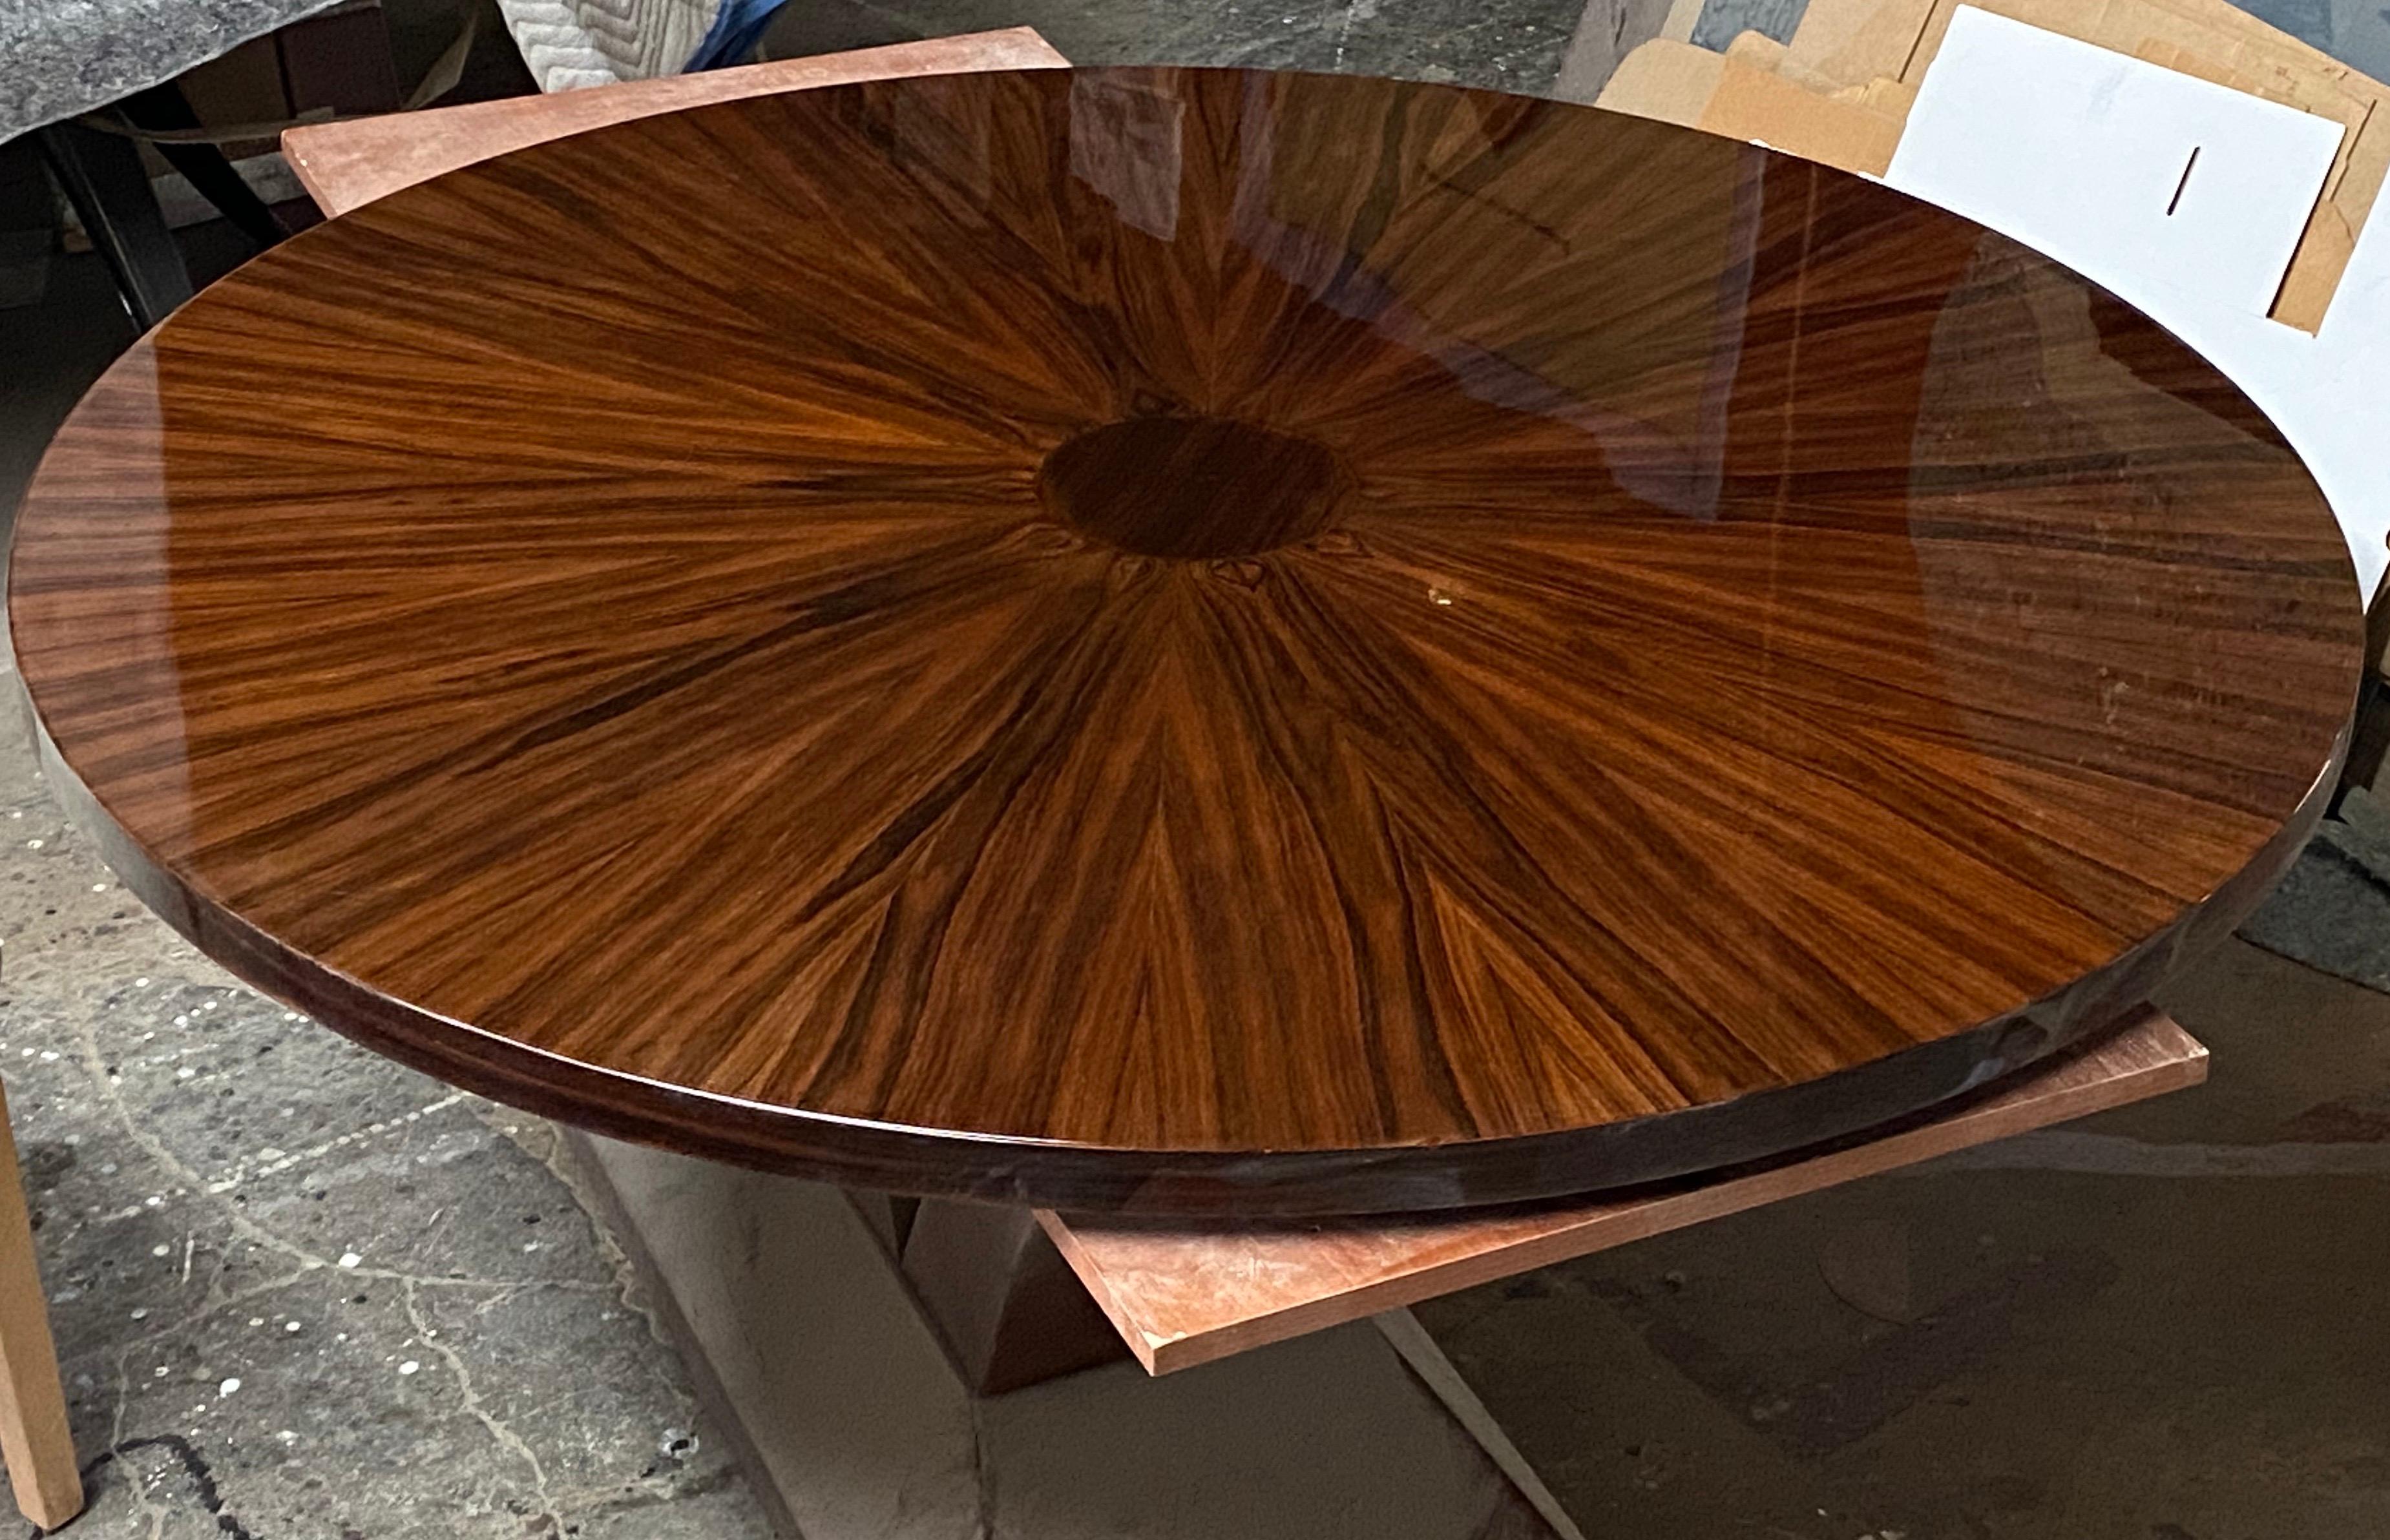 Spectacular custom rosewood dining table (top only). This gorgeous top is finished in a high gloss to enhance the beauty of the wood and elegant design. It's beveled 2